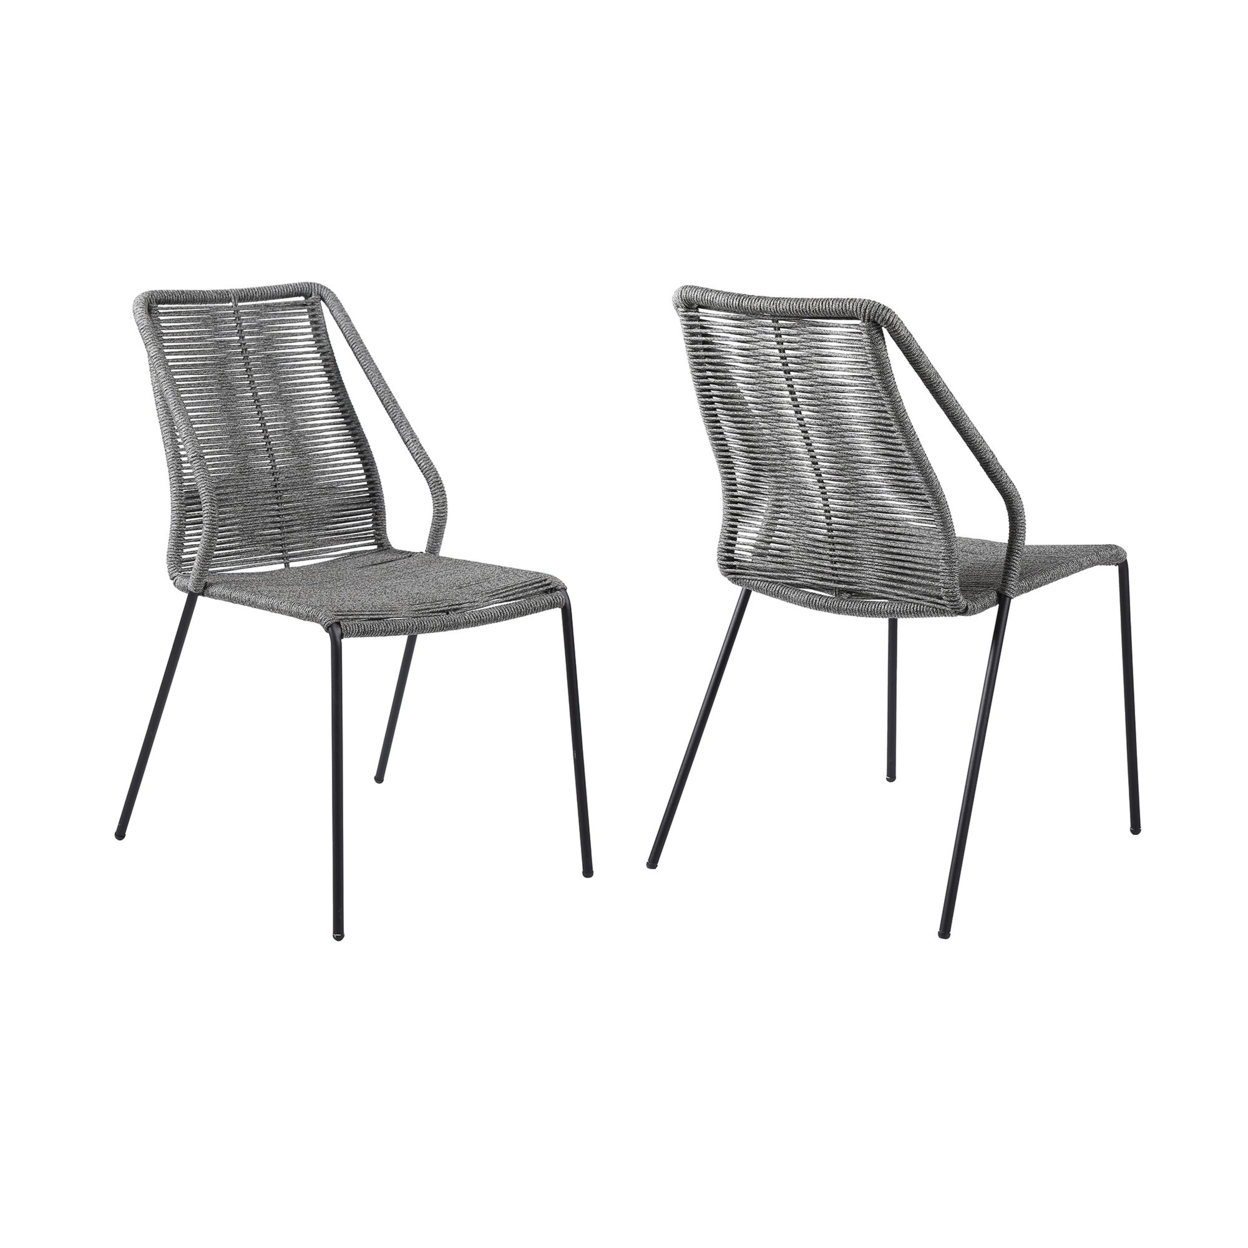 Indoor Outdoor Dining Chair With Fishbone Woven Seating, Set Of 2, Gray- Saltoro Sherpi